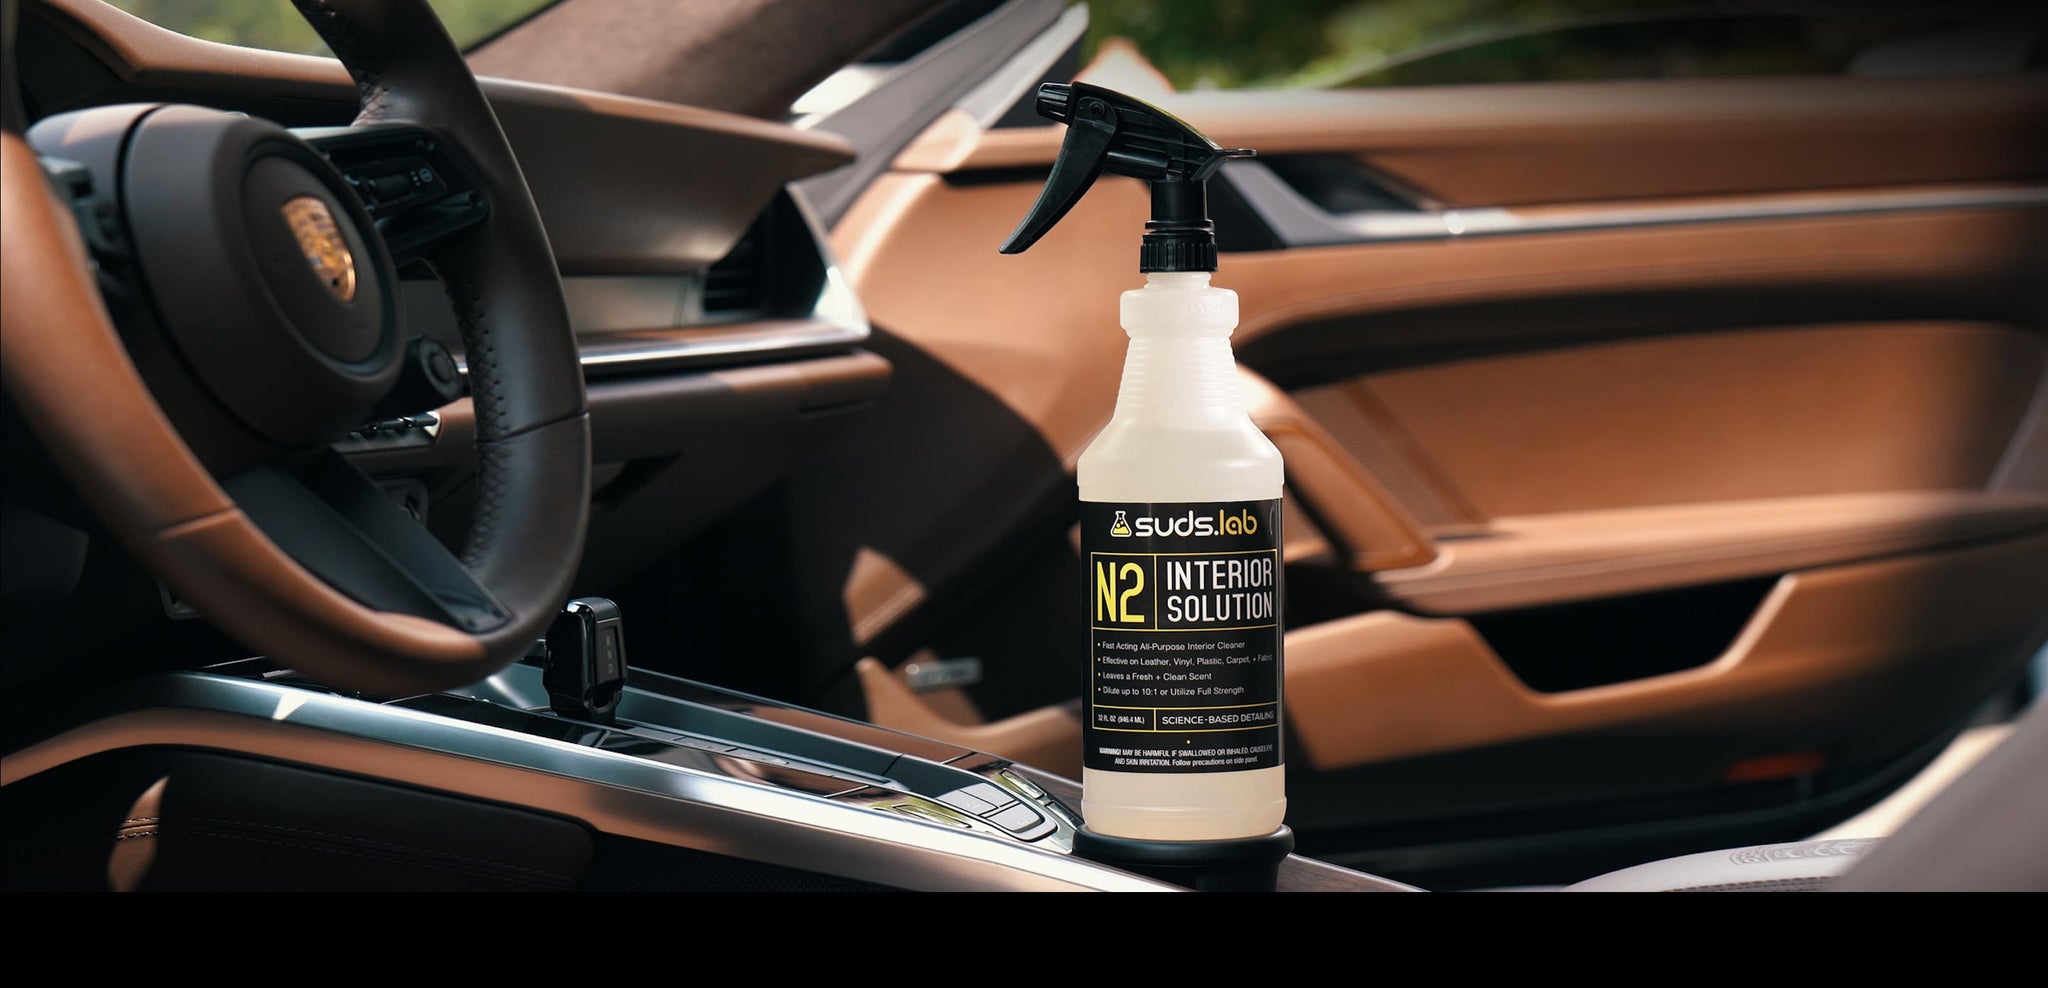 C3 the Complete Car Cleaner let's see what up 🧼🇺🇸 @Suds.Lab #autode